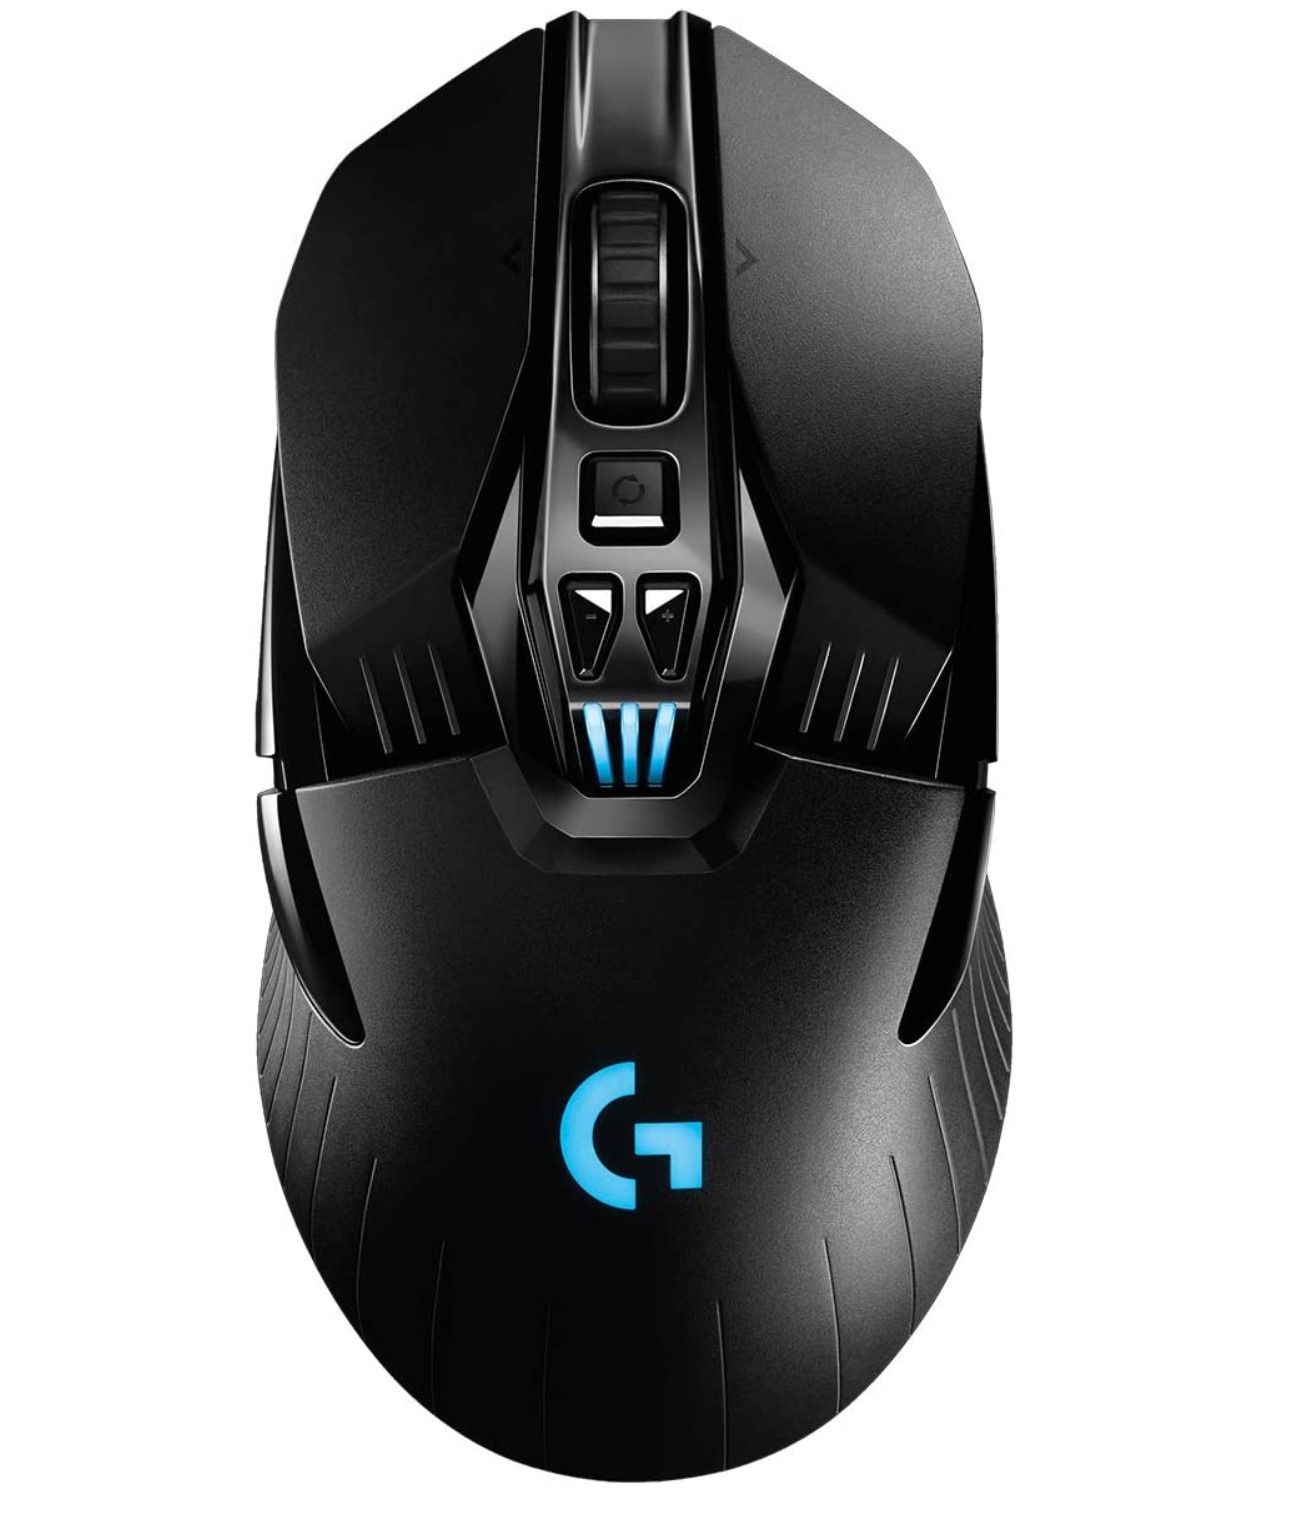 Logitech G903 Lightspeed Wireless Gaming Mouse with RGB